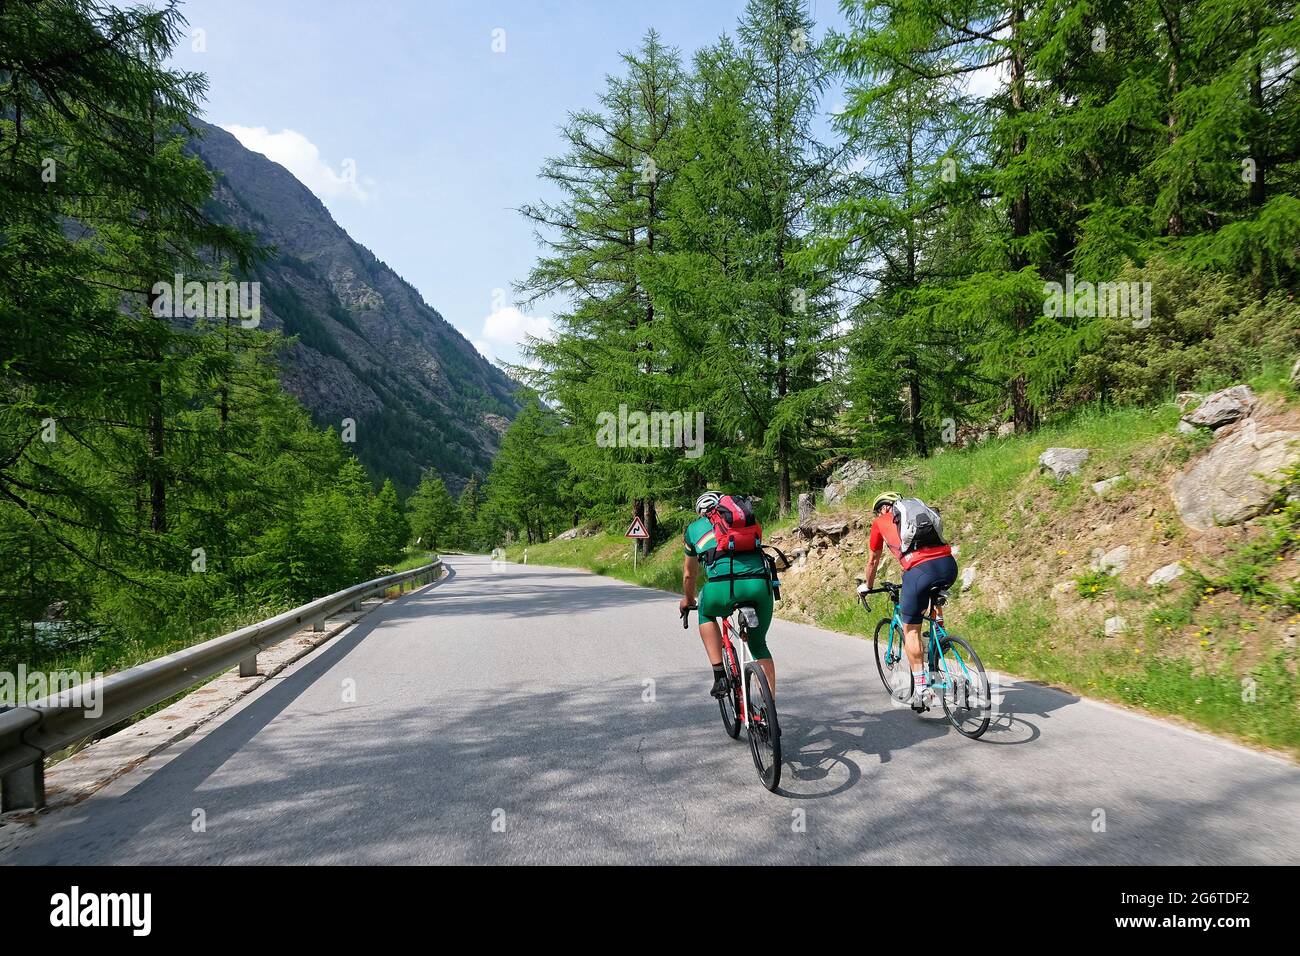 Road cyclist in the canton of Valais, Switzerland. Stock Photo